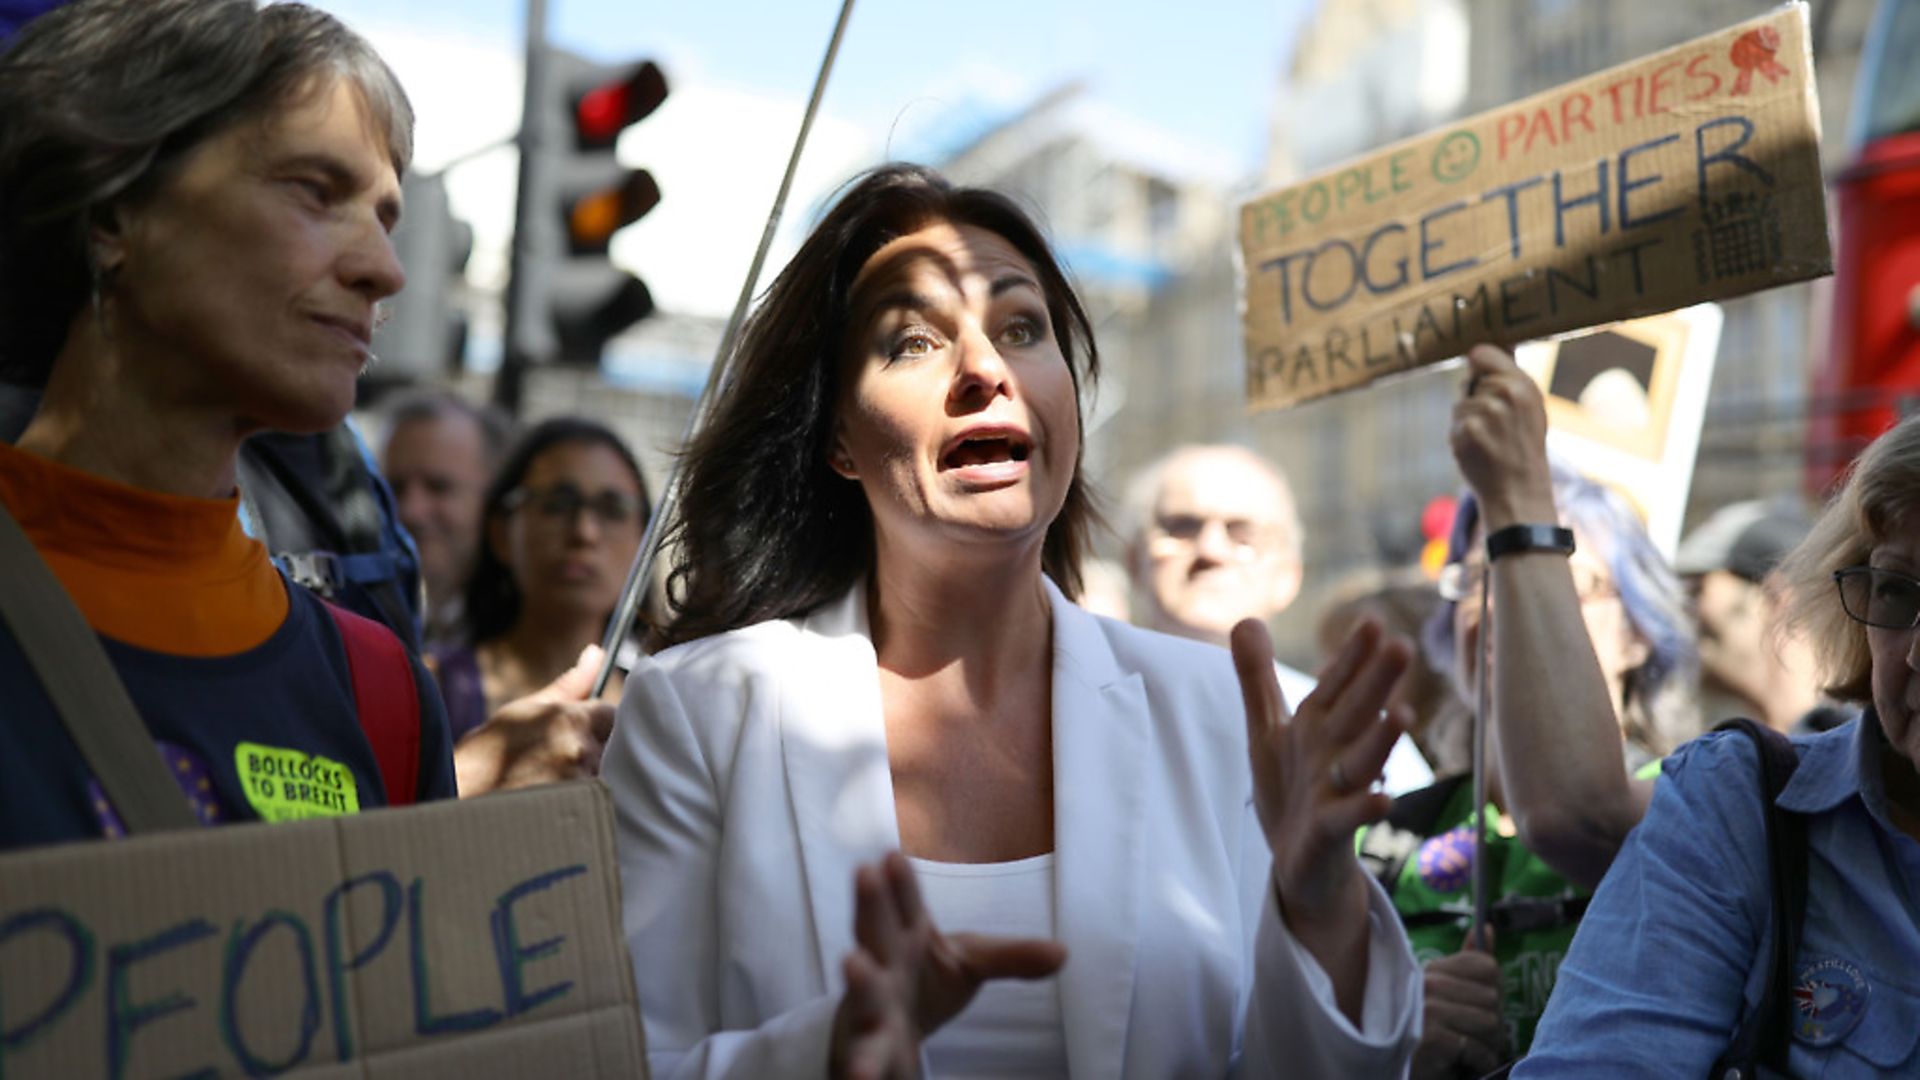 Heidi Allen speaks to Brexit protesters outside the Houses of Parliament in Westminster, London. Photo: Aaron Chown / PA - Credit: PA Wire/PA Images